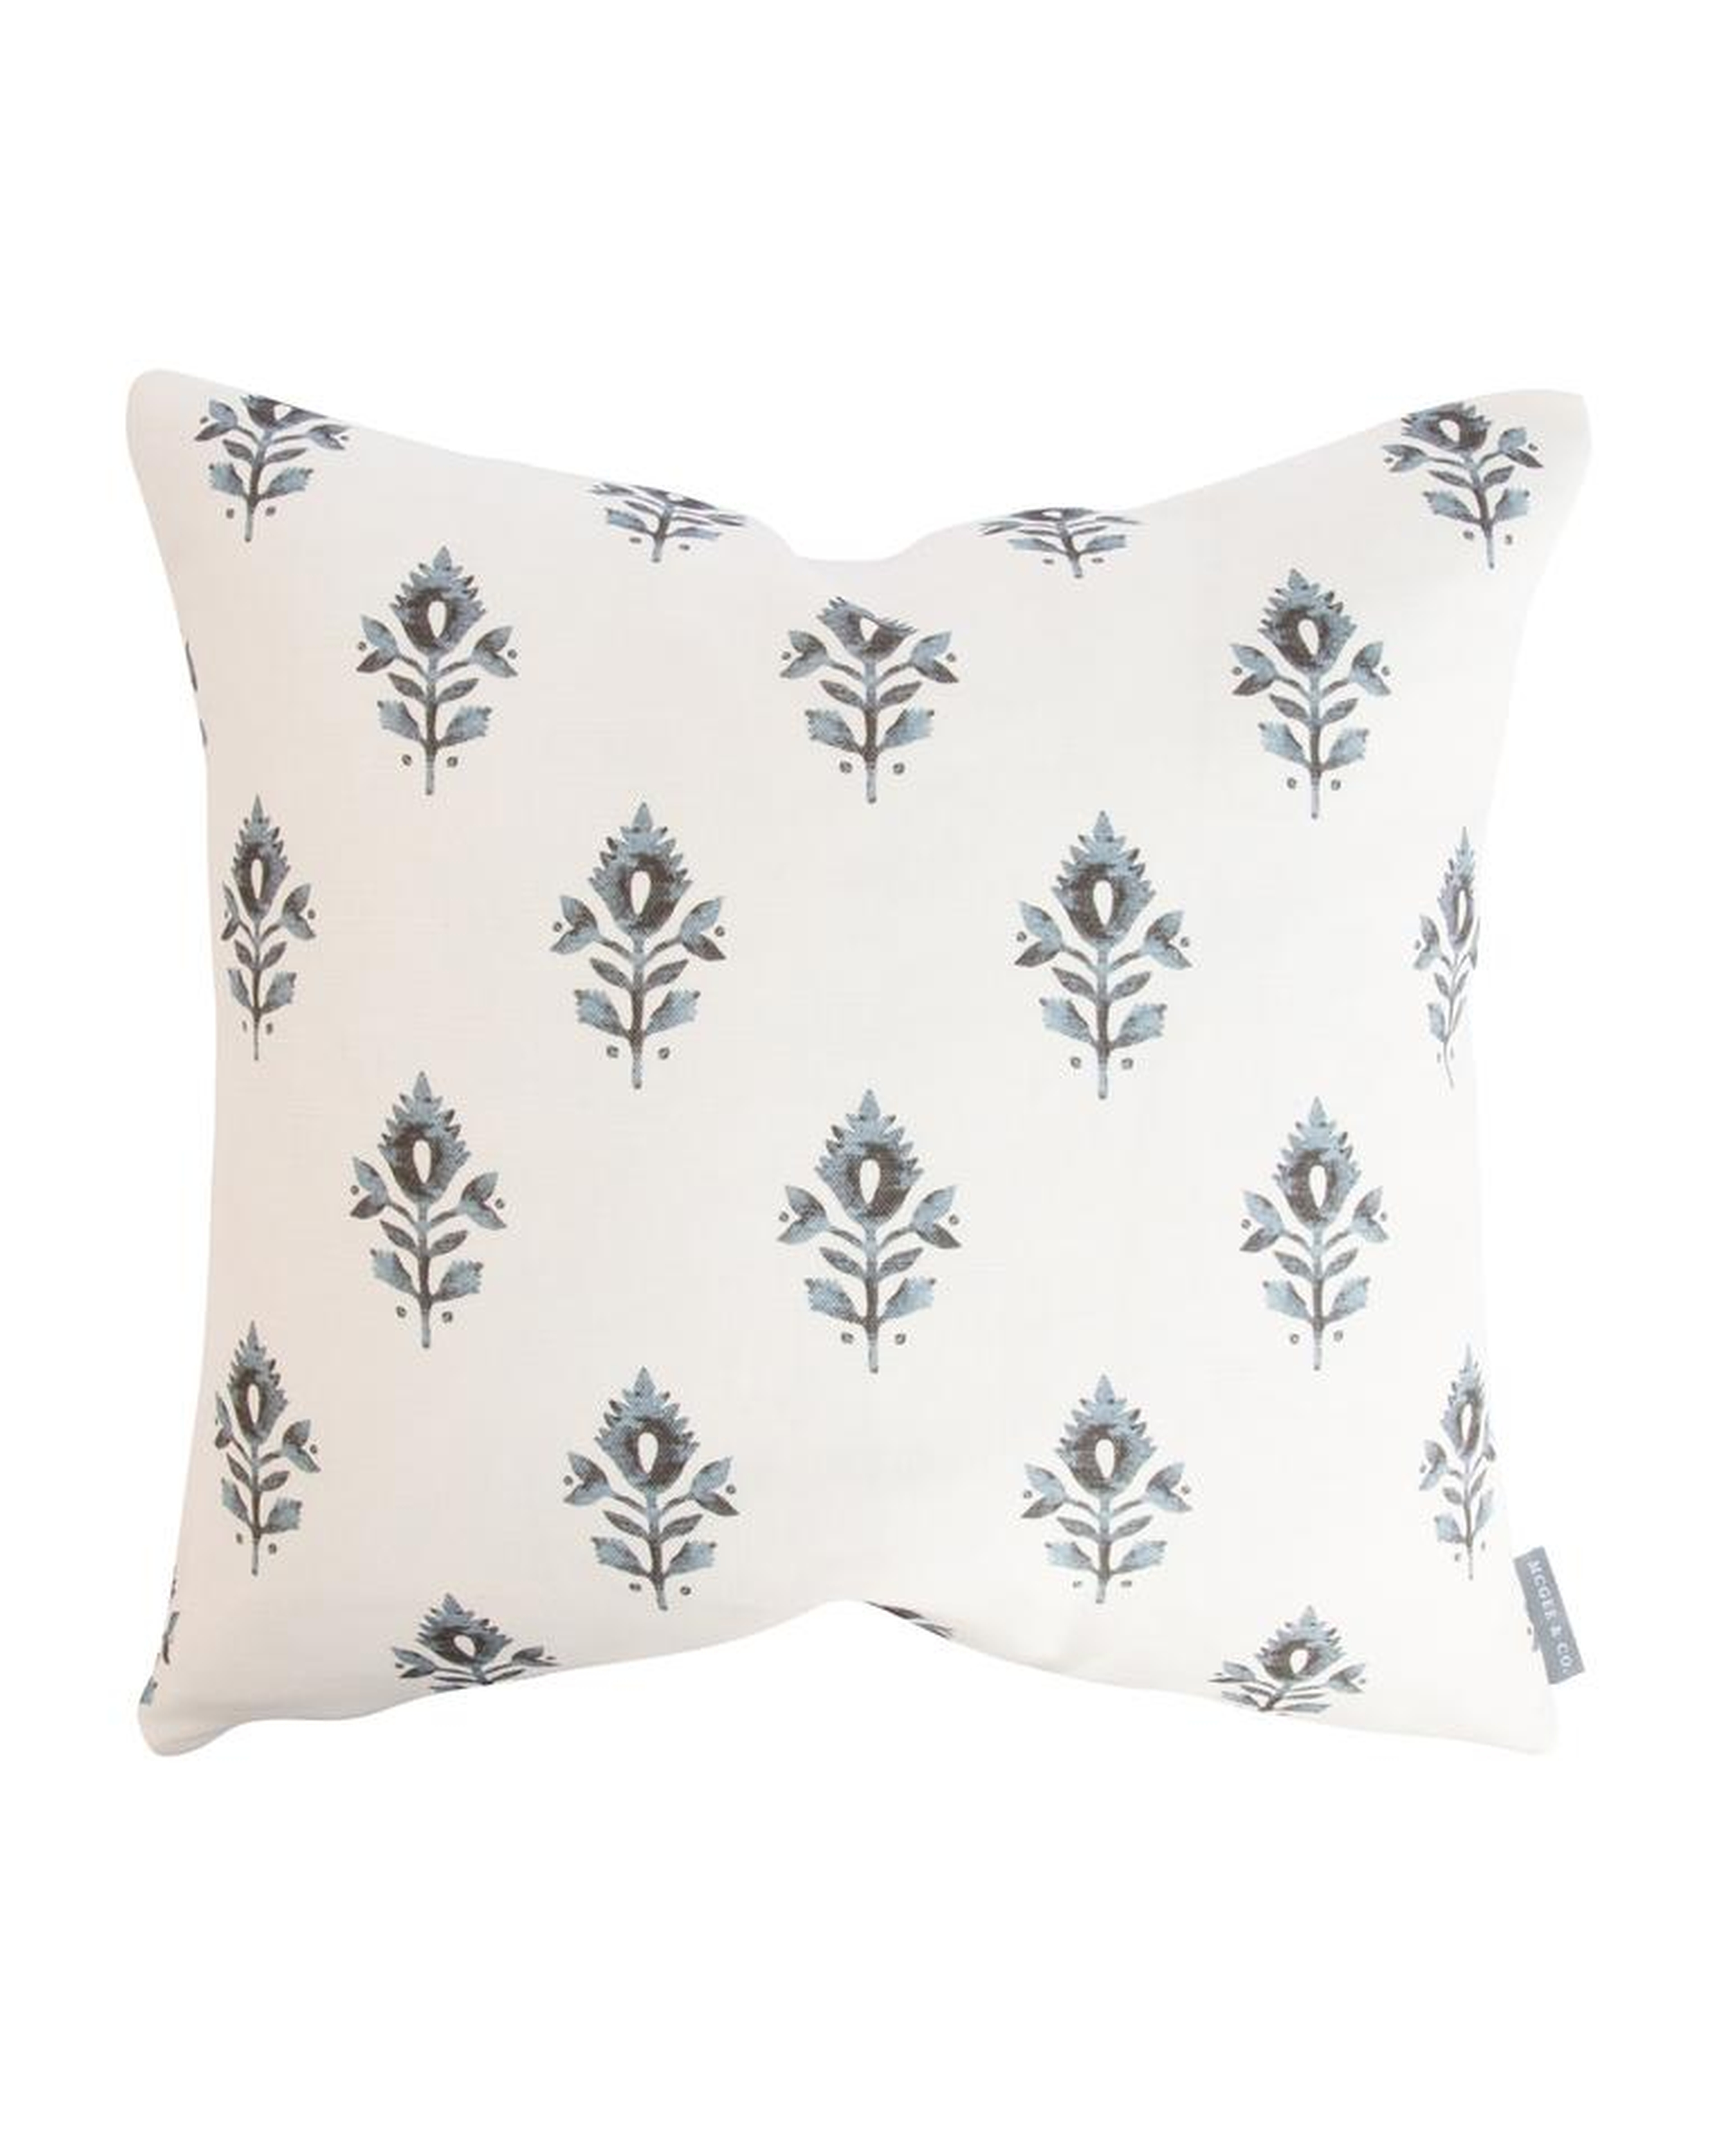 ADDISON BLOCK PRINT PILLOW WITHOUT INSERT, 24" x 24" - McGee & Co.